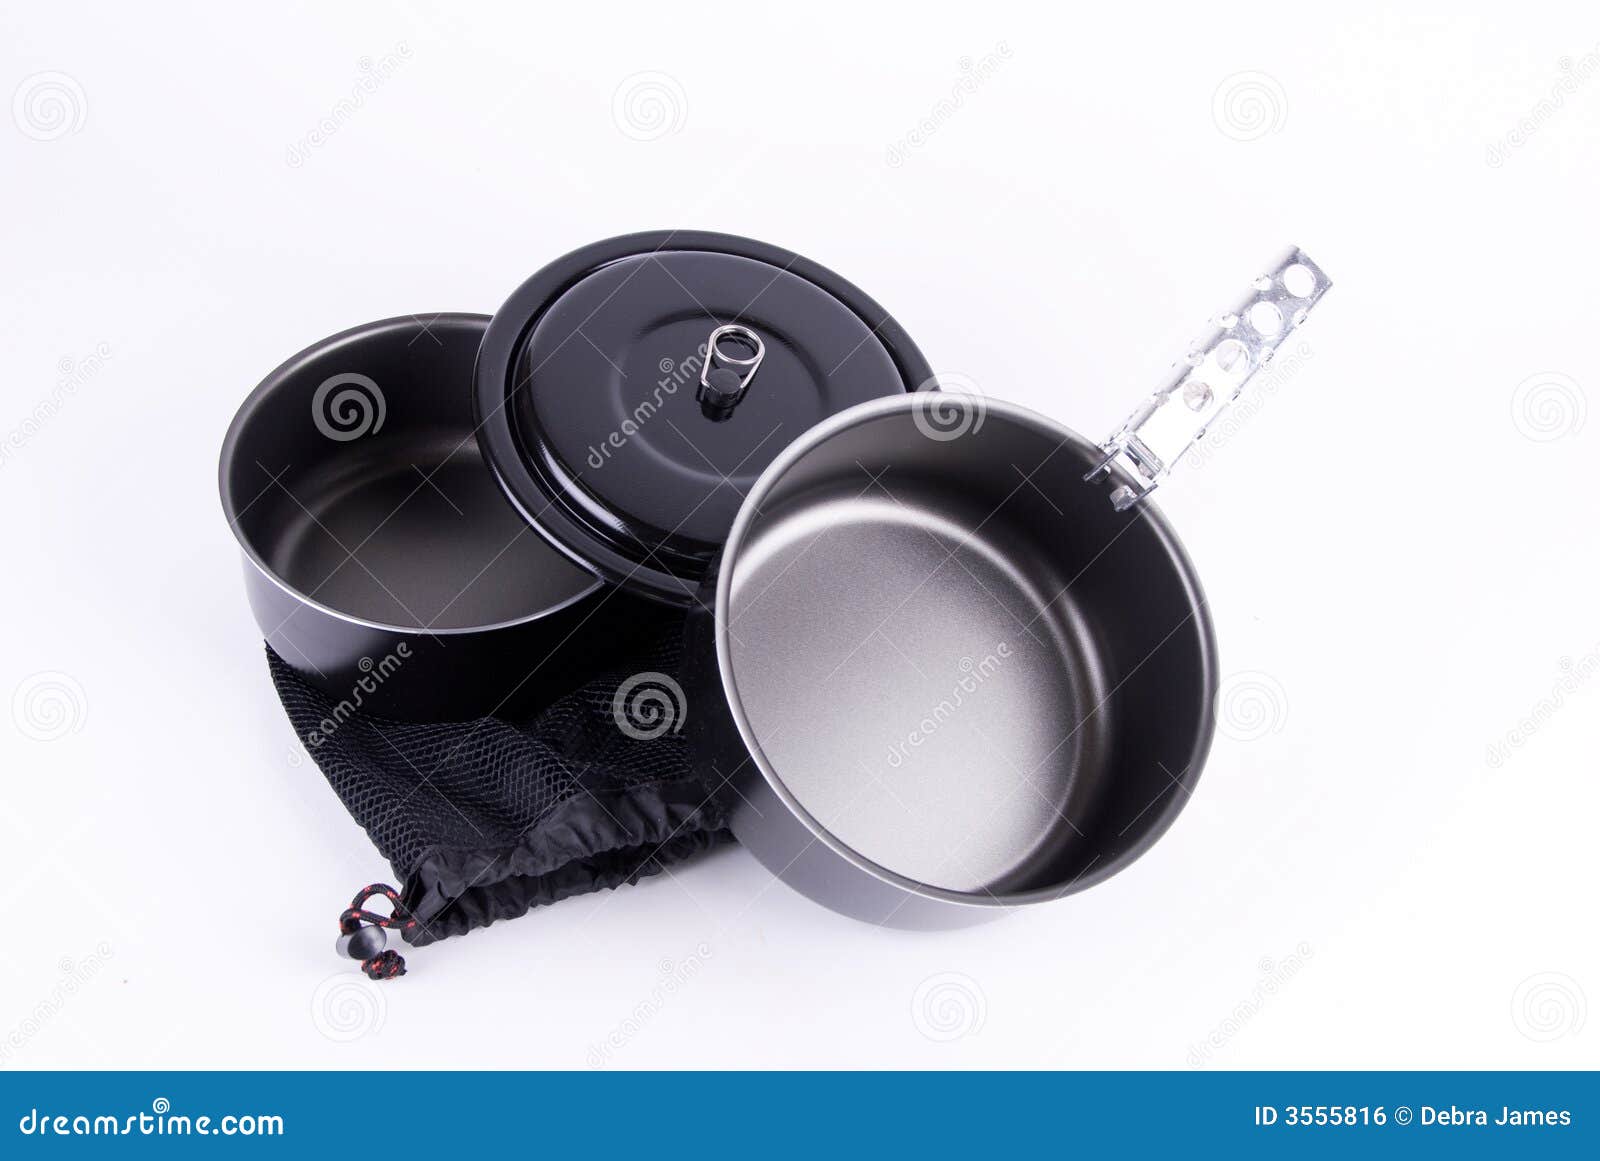 backpacking cookware on white